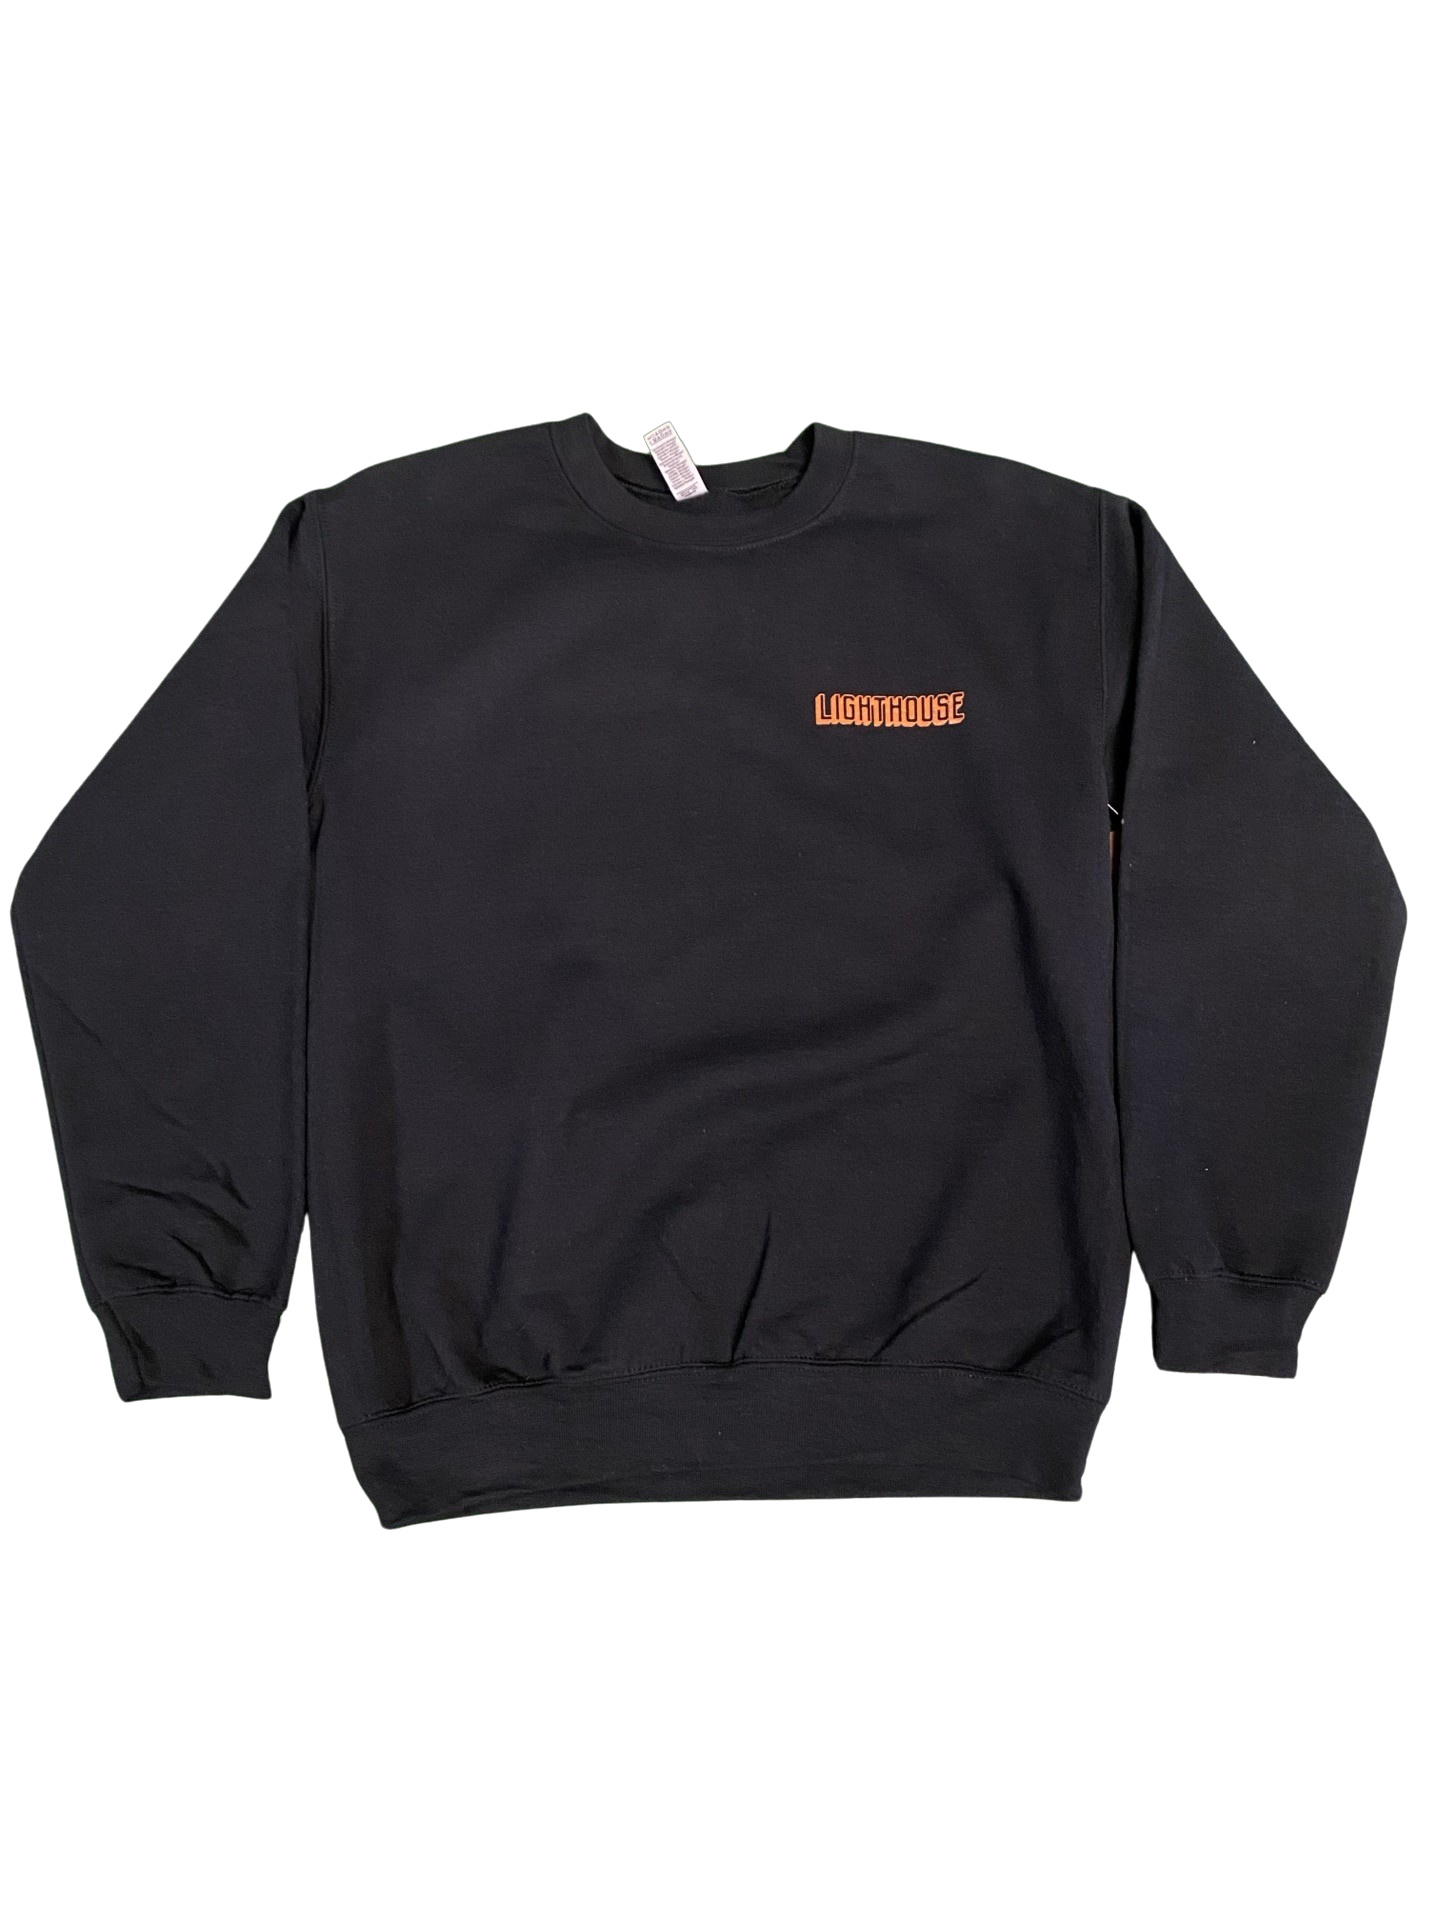 Lighthouse Store Front Youth Crewneck